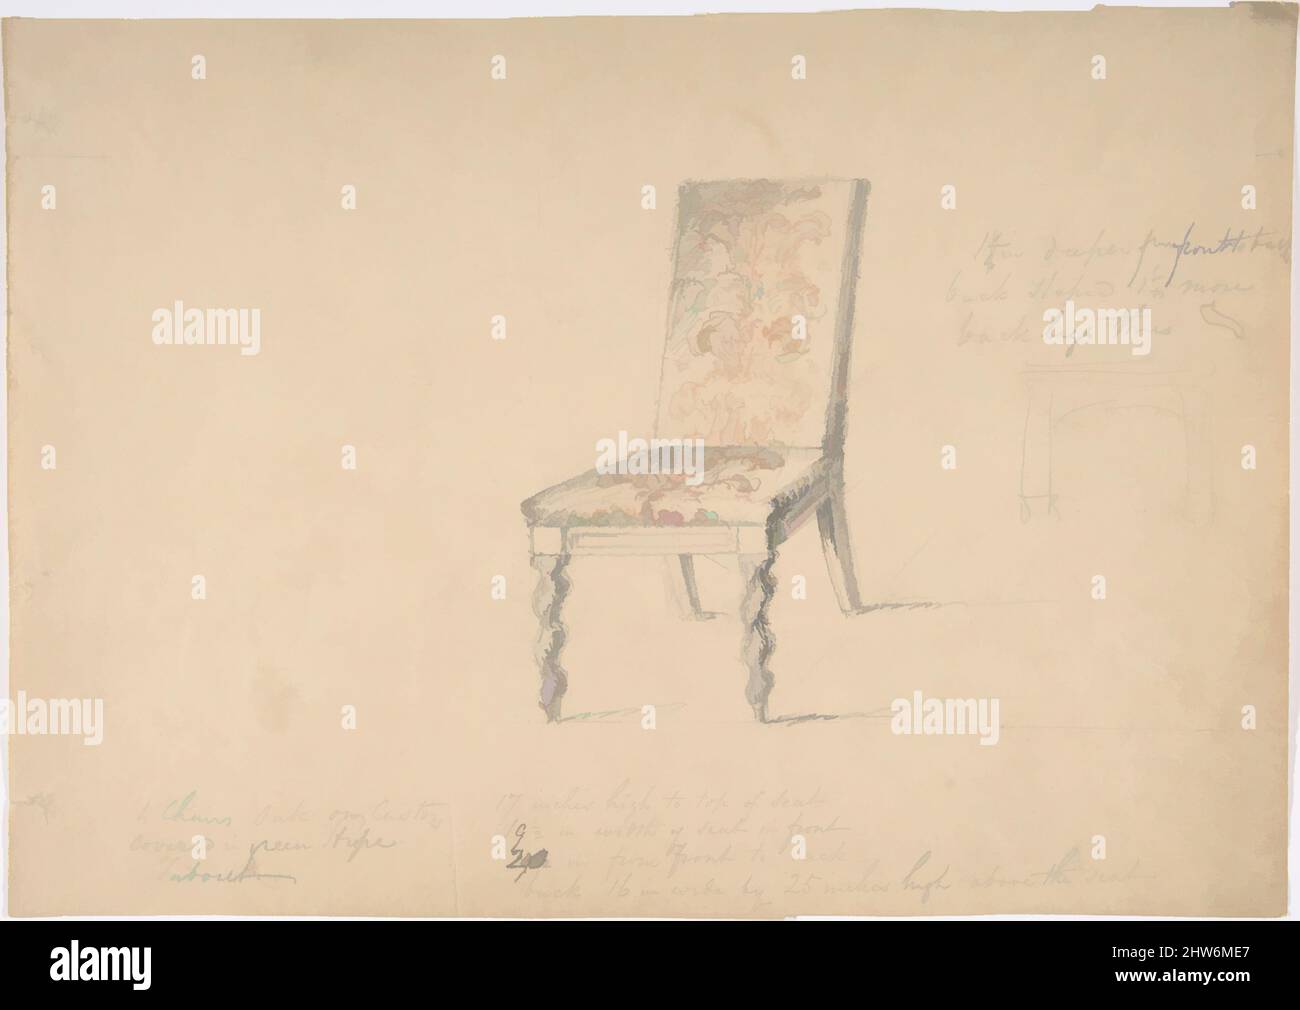 Art inspired by Design for a Chair with Turned Front Legs, early 19th century, Ink, watercolor and wash, sheet: 8 11/16 x 12 1/4 in. (22 x 31.1 cm), Anonymous, British, 19th century, Classic works modernized by Artotop with a splash of modernity. Shapes, color and value, eye-catching visual impact on art. Emotions through freedom of artworks in a contemporary way. A timeless message pursuing a wildly creative new direction. Artists turning to the digital medium and creating the Artotop NFT Stock Photo